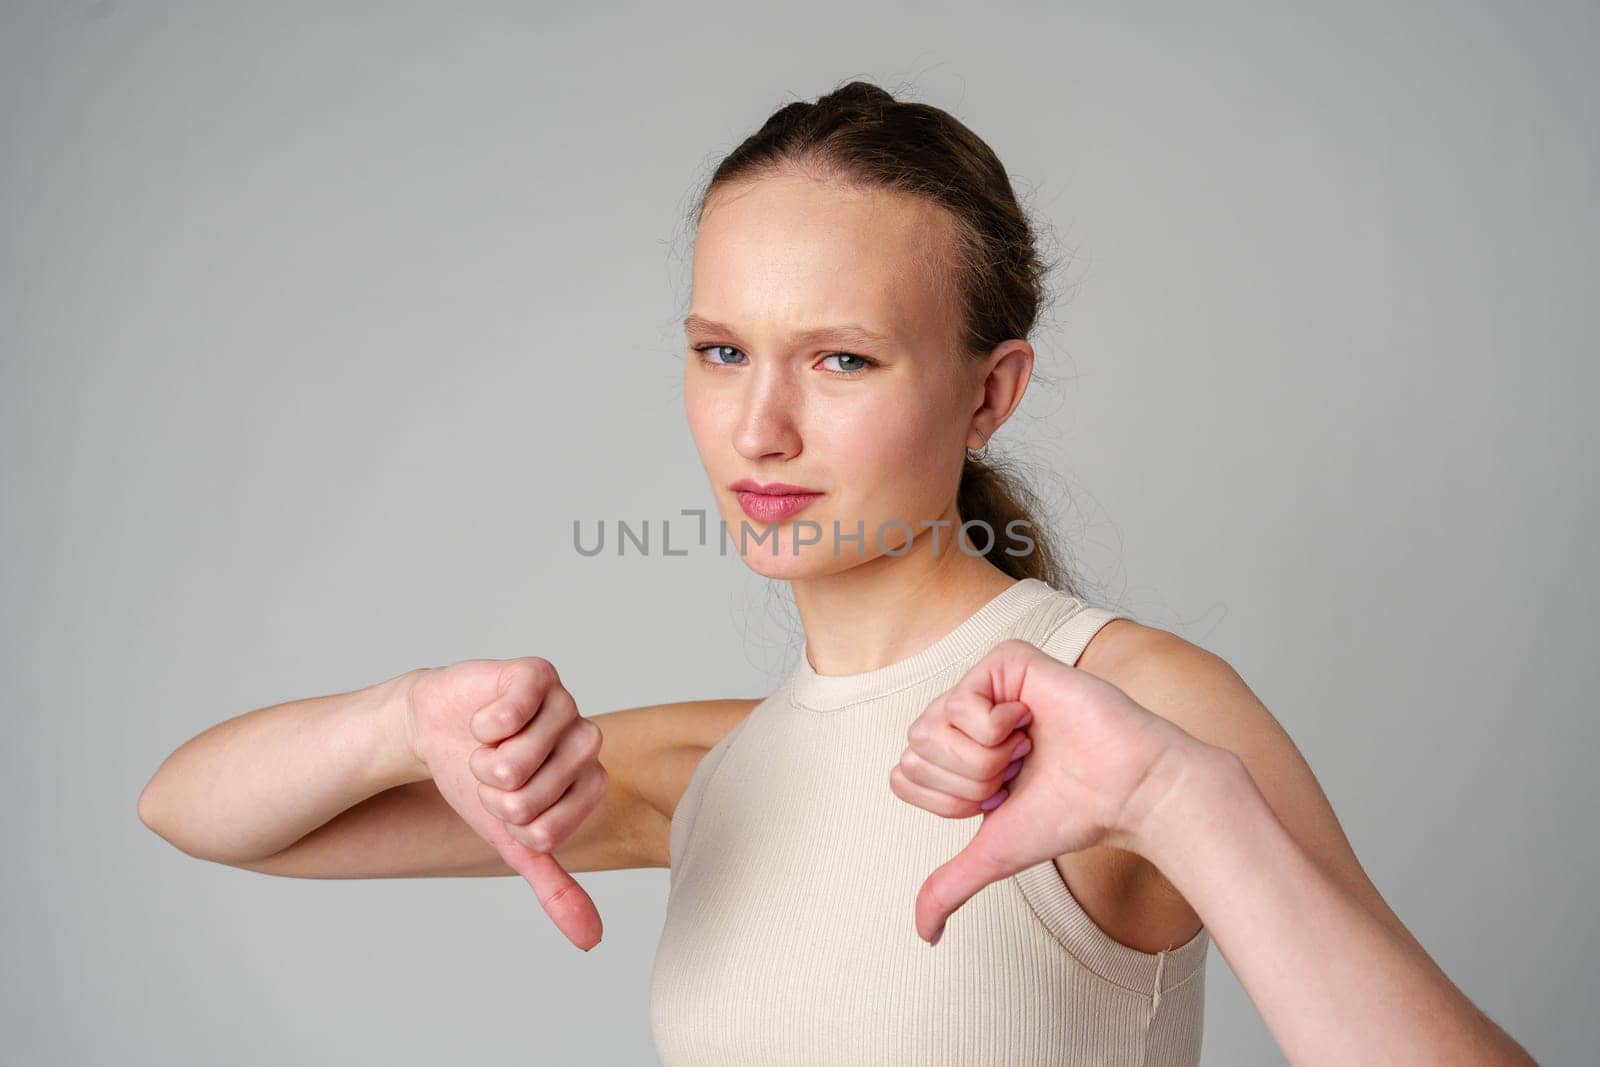 Young Woman Giving Thumbs Down Gesture Against a Neutral Background in studio